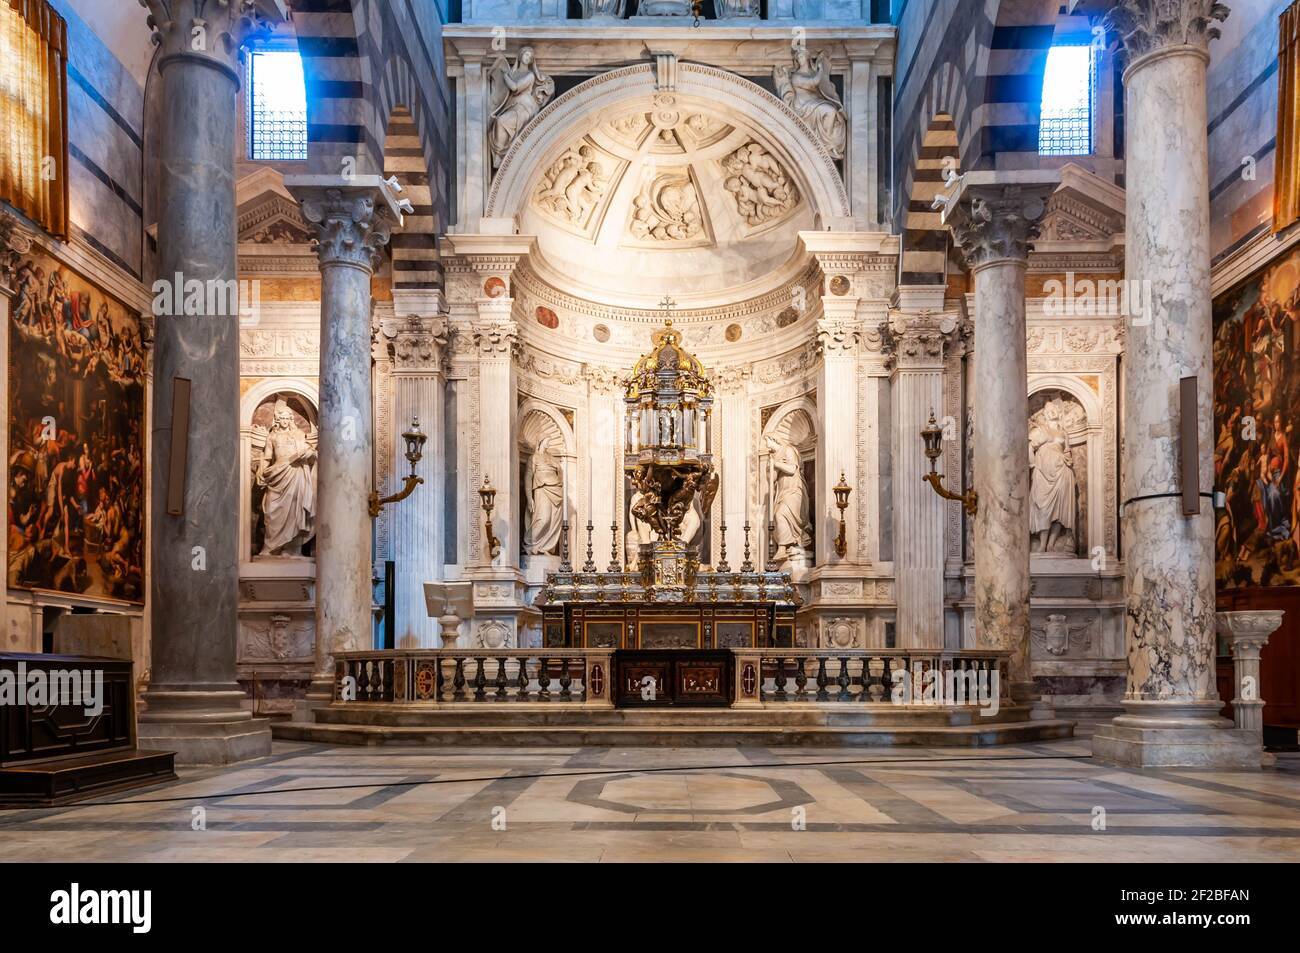 Interiors and architectural details of Pisa cathedral in Tuscany, Italy Stock Photo